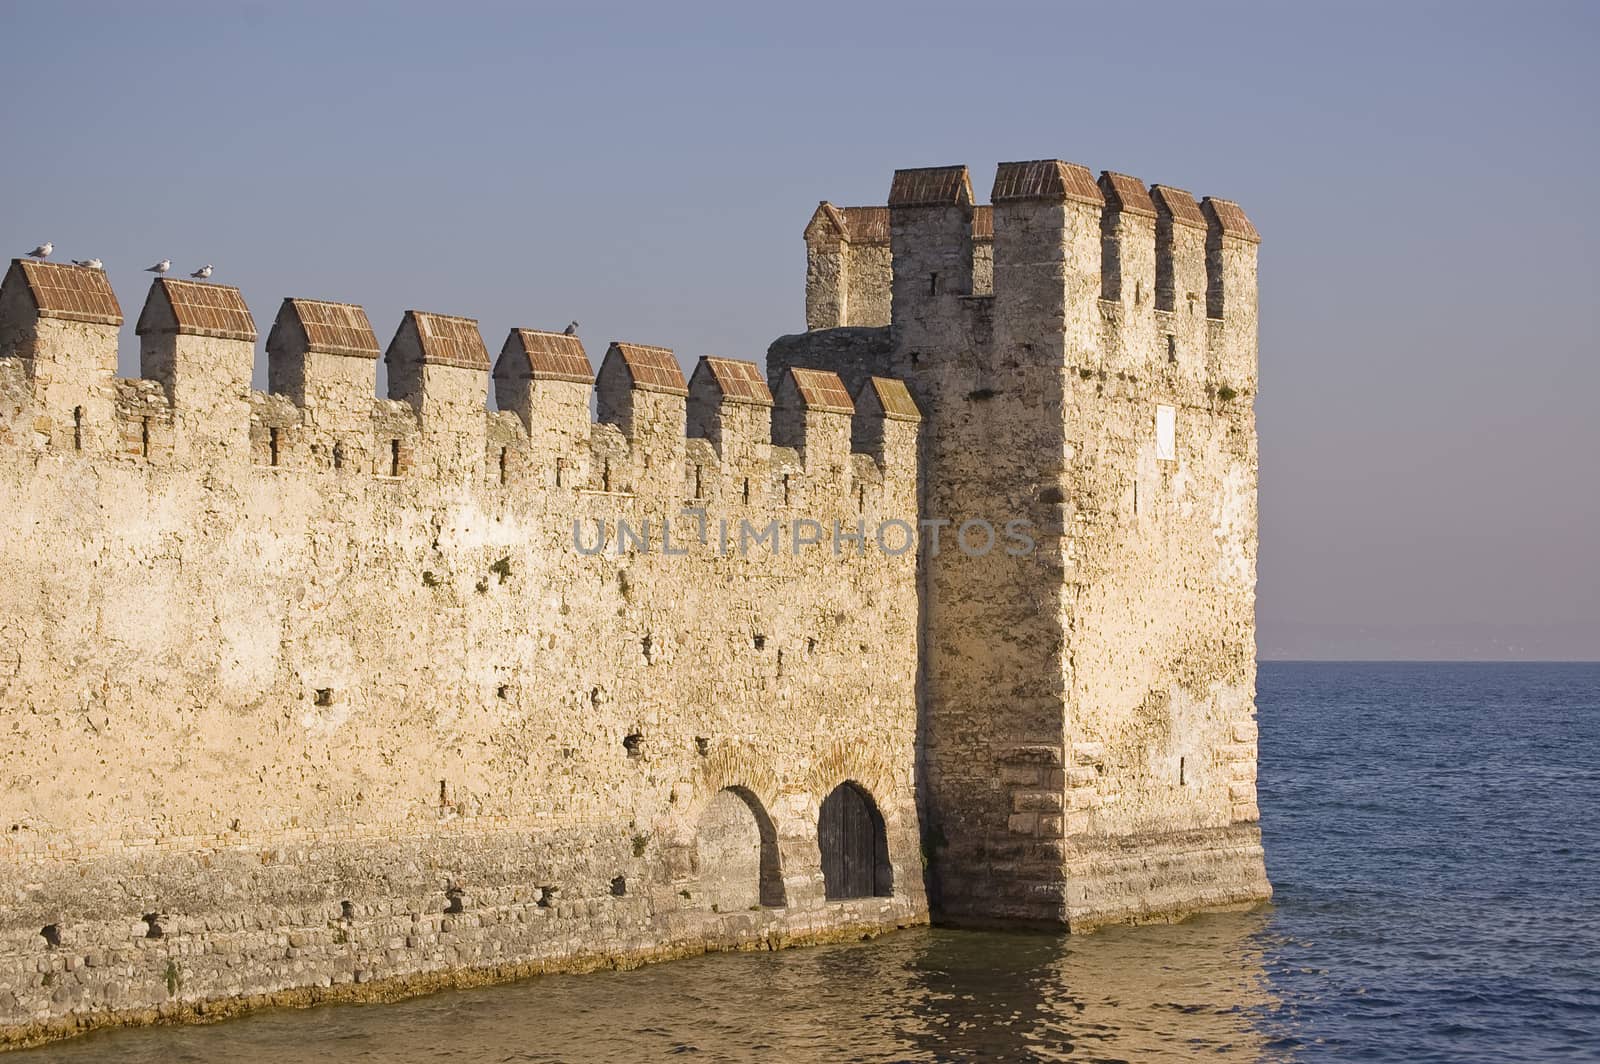 the fortification on the Garda's lake, Lazise, Italy by edella